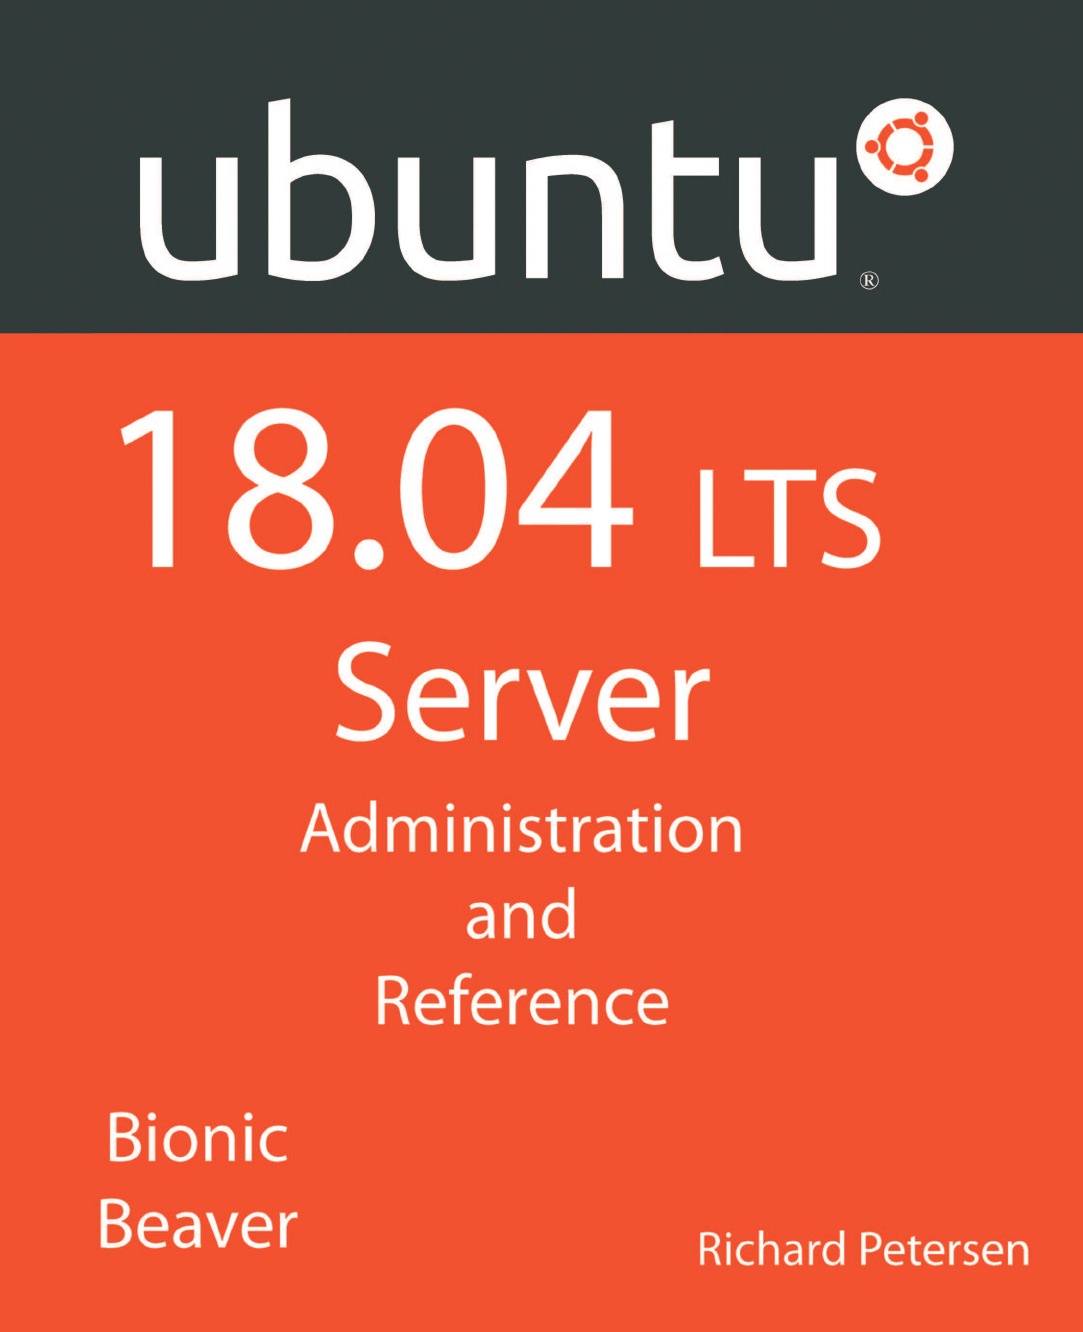 Ubuntu 18.04 LTS Server. Administration and Reference